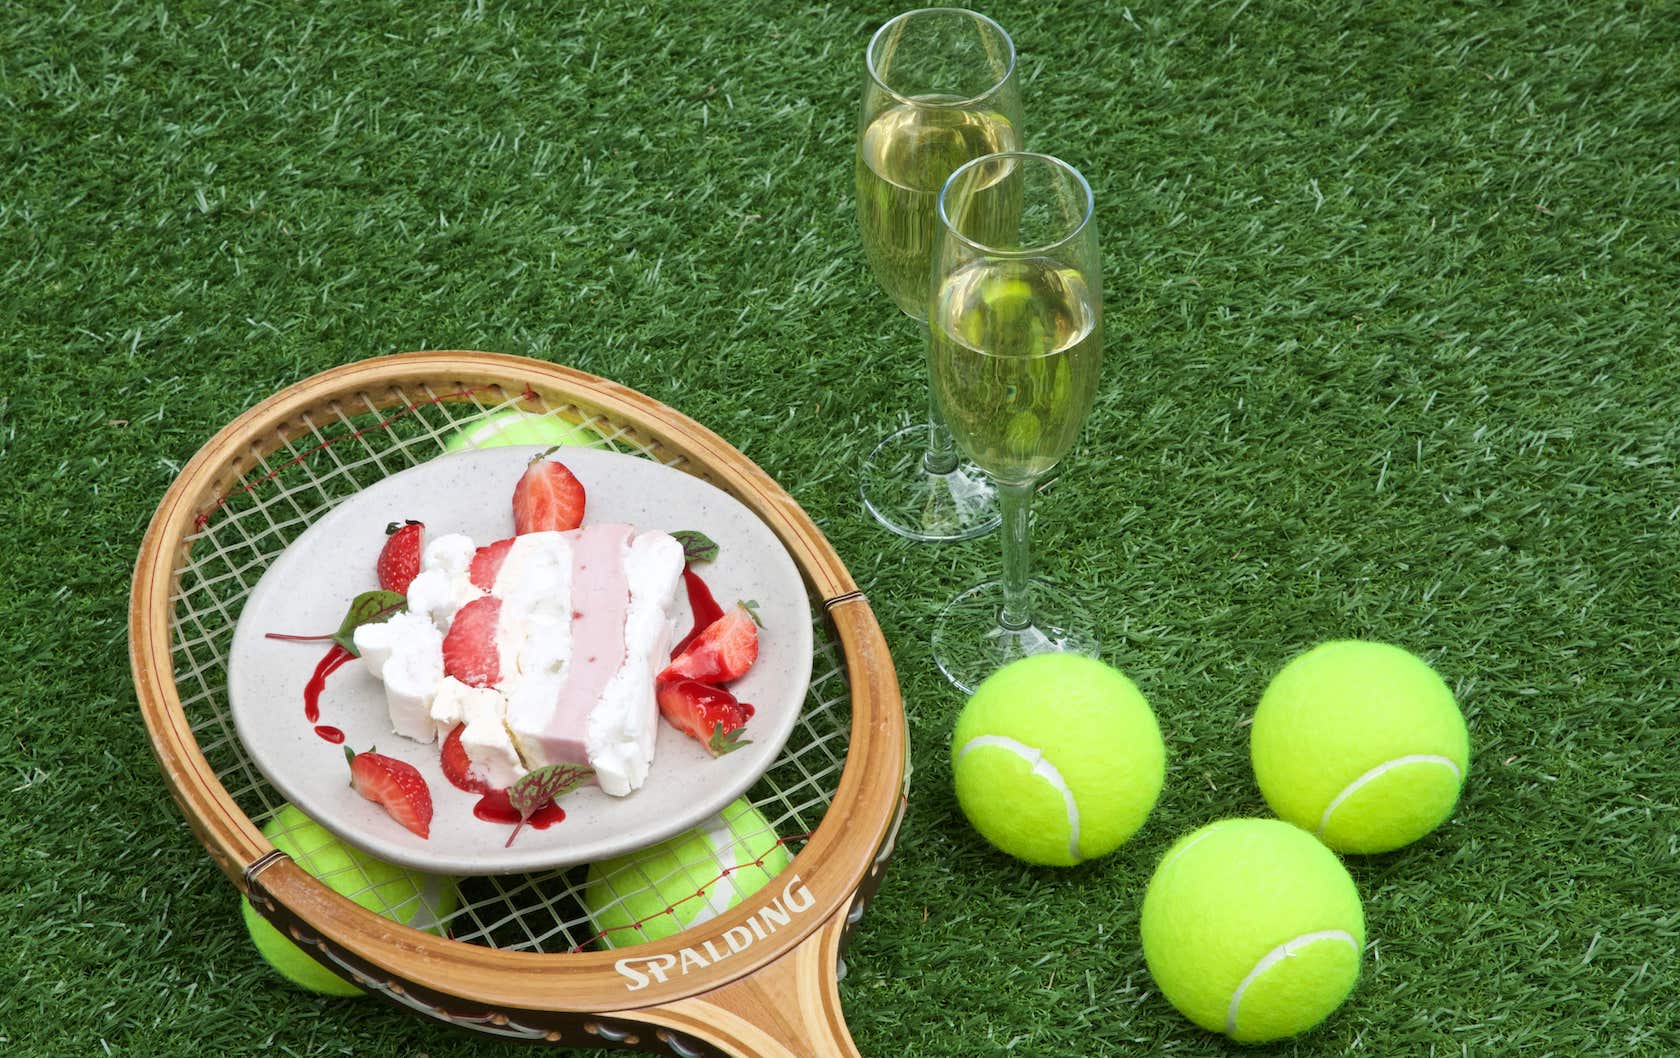 guide to Wimbledon by London Perfect